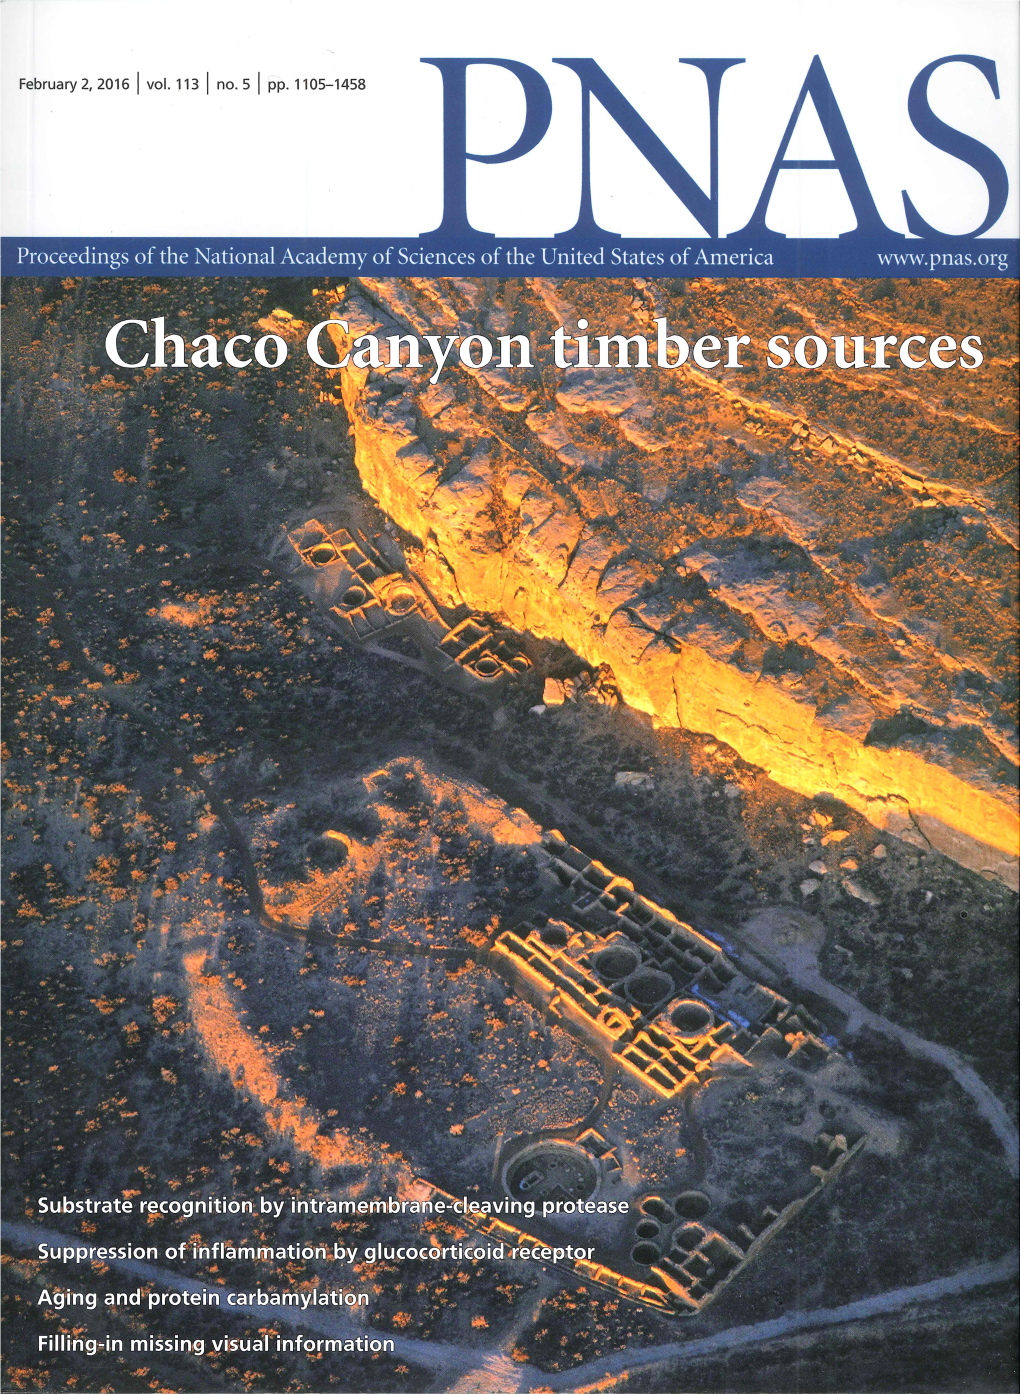 Eleventh-Century Shift in Timber Procurement Areas for the Great Houses of Chaco Canyon